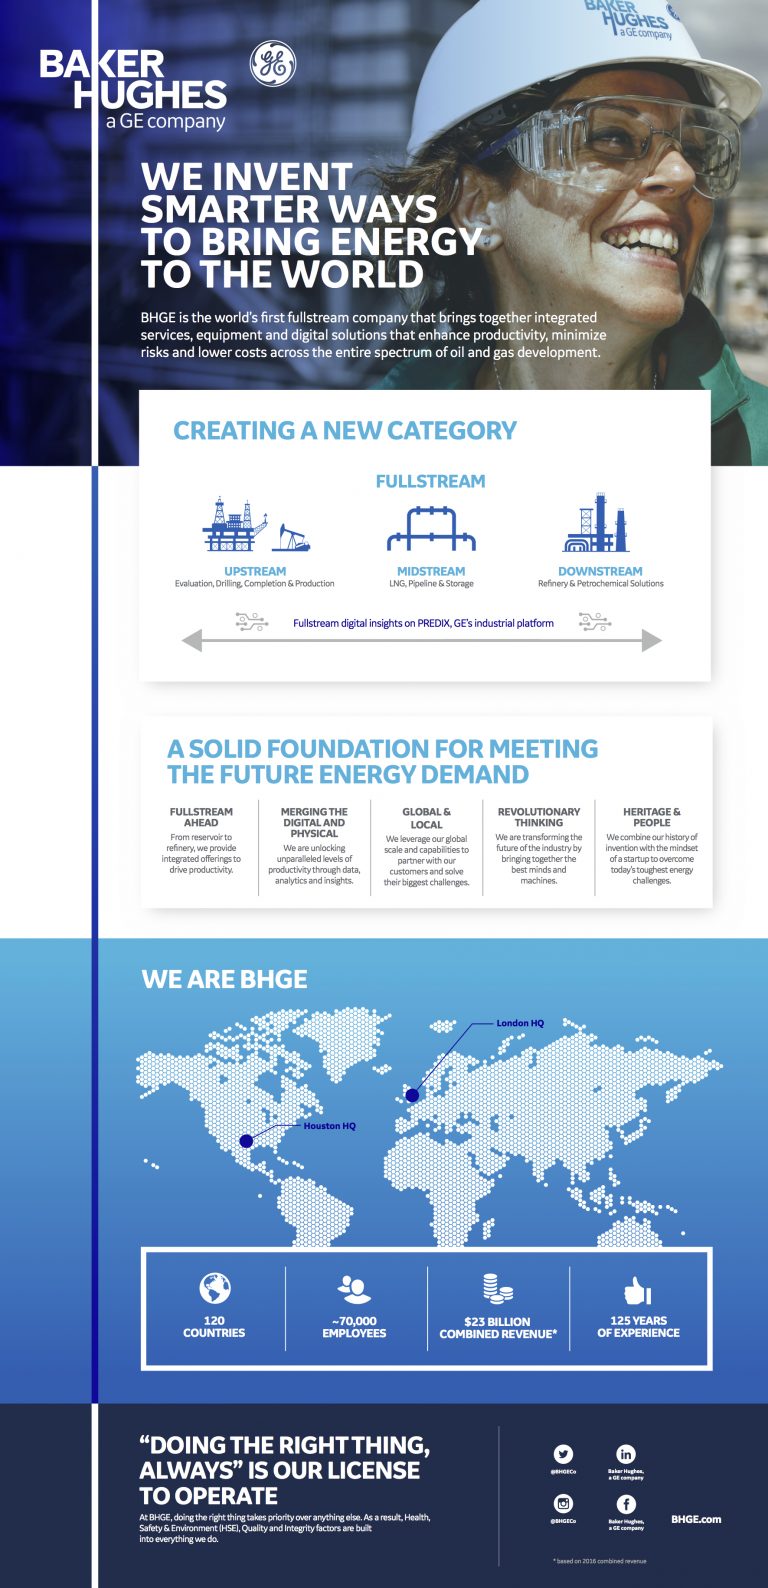 Baker Hughes and GE Oil & Gas complete combination, creating the world’s first and only fullstream oil and gas company